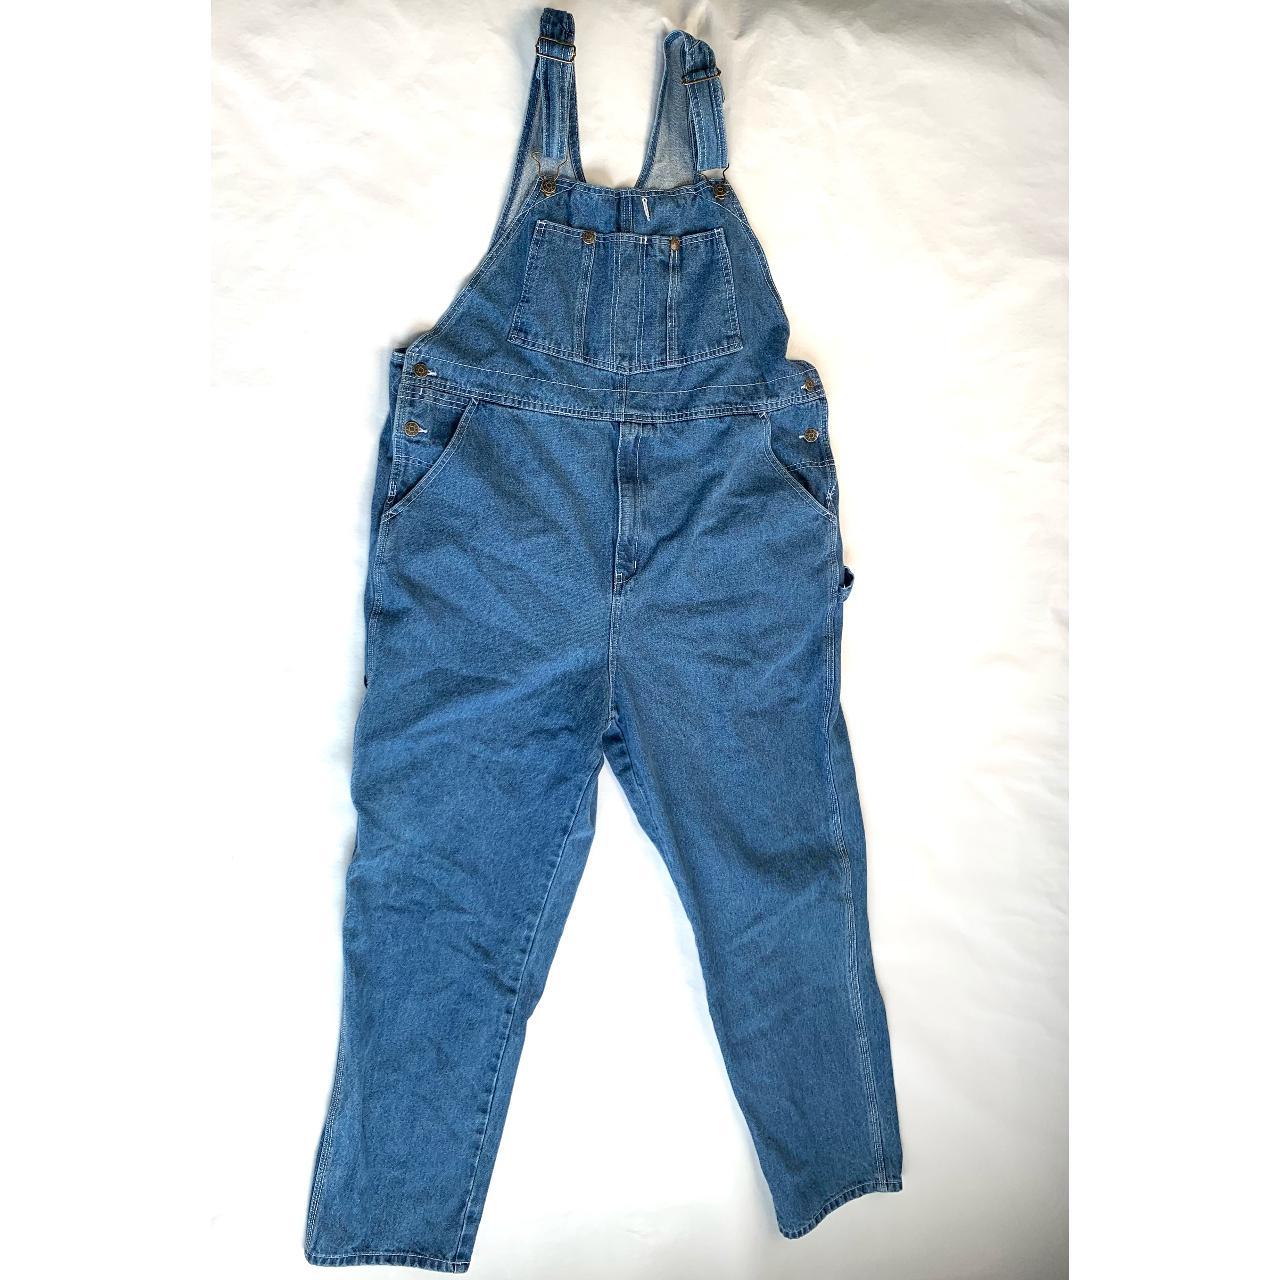 Product Image 1 - Vintage 90s jean overalls, Guide